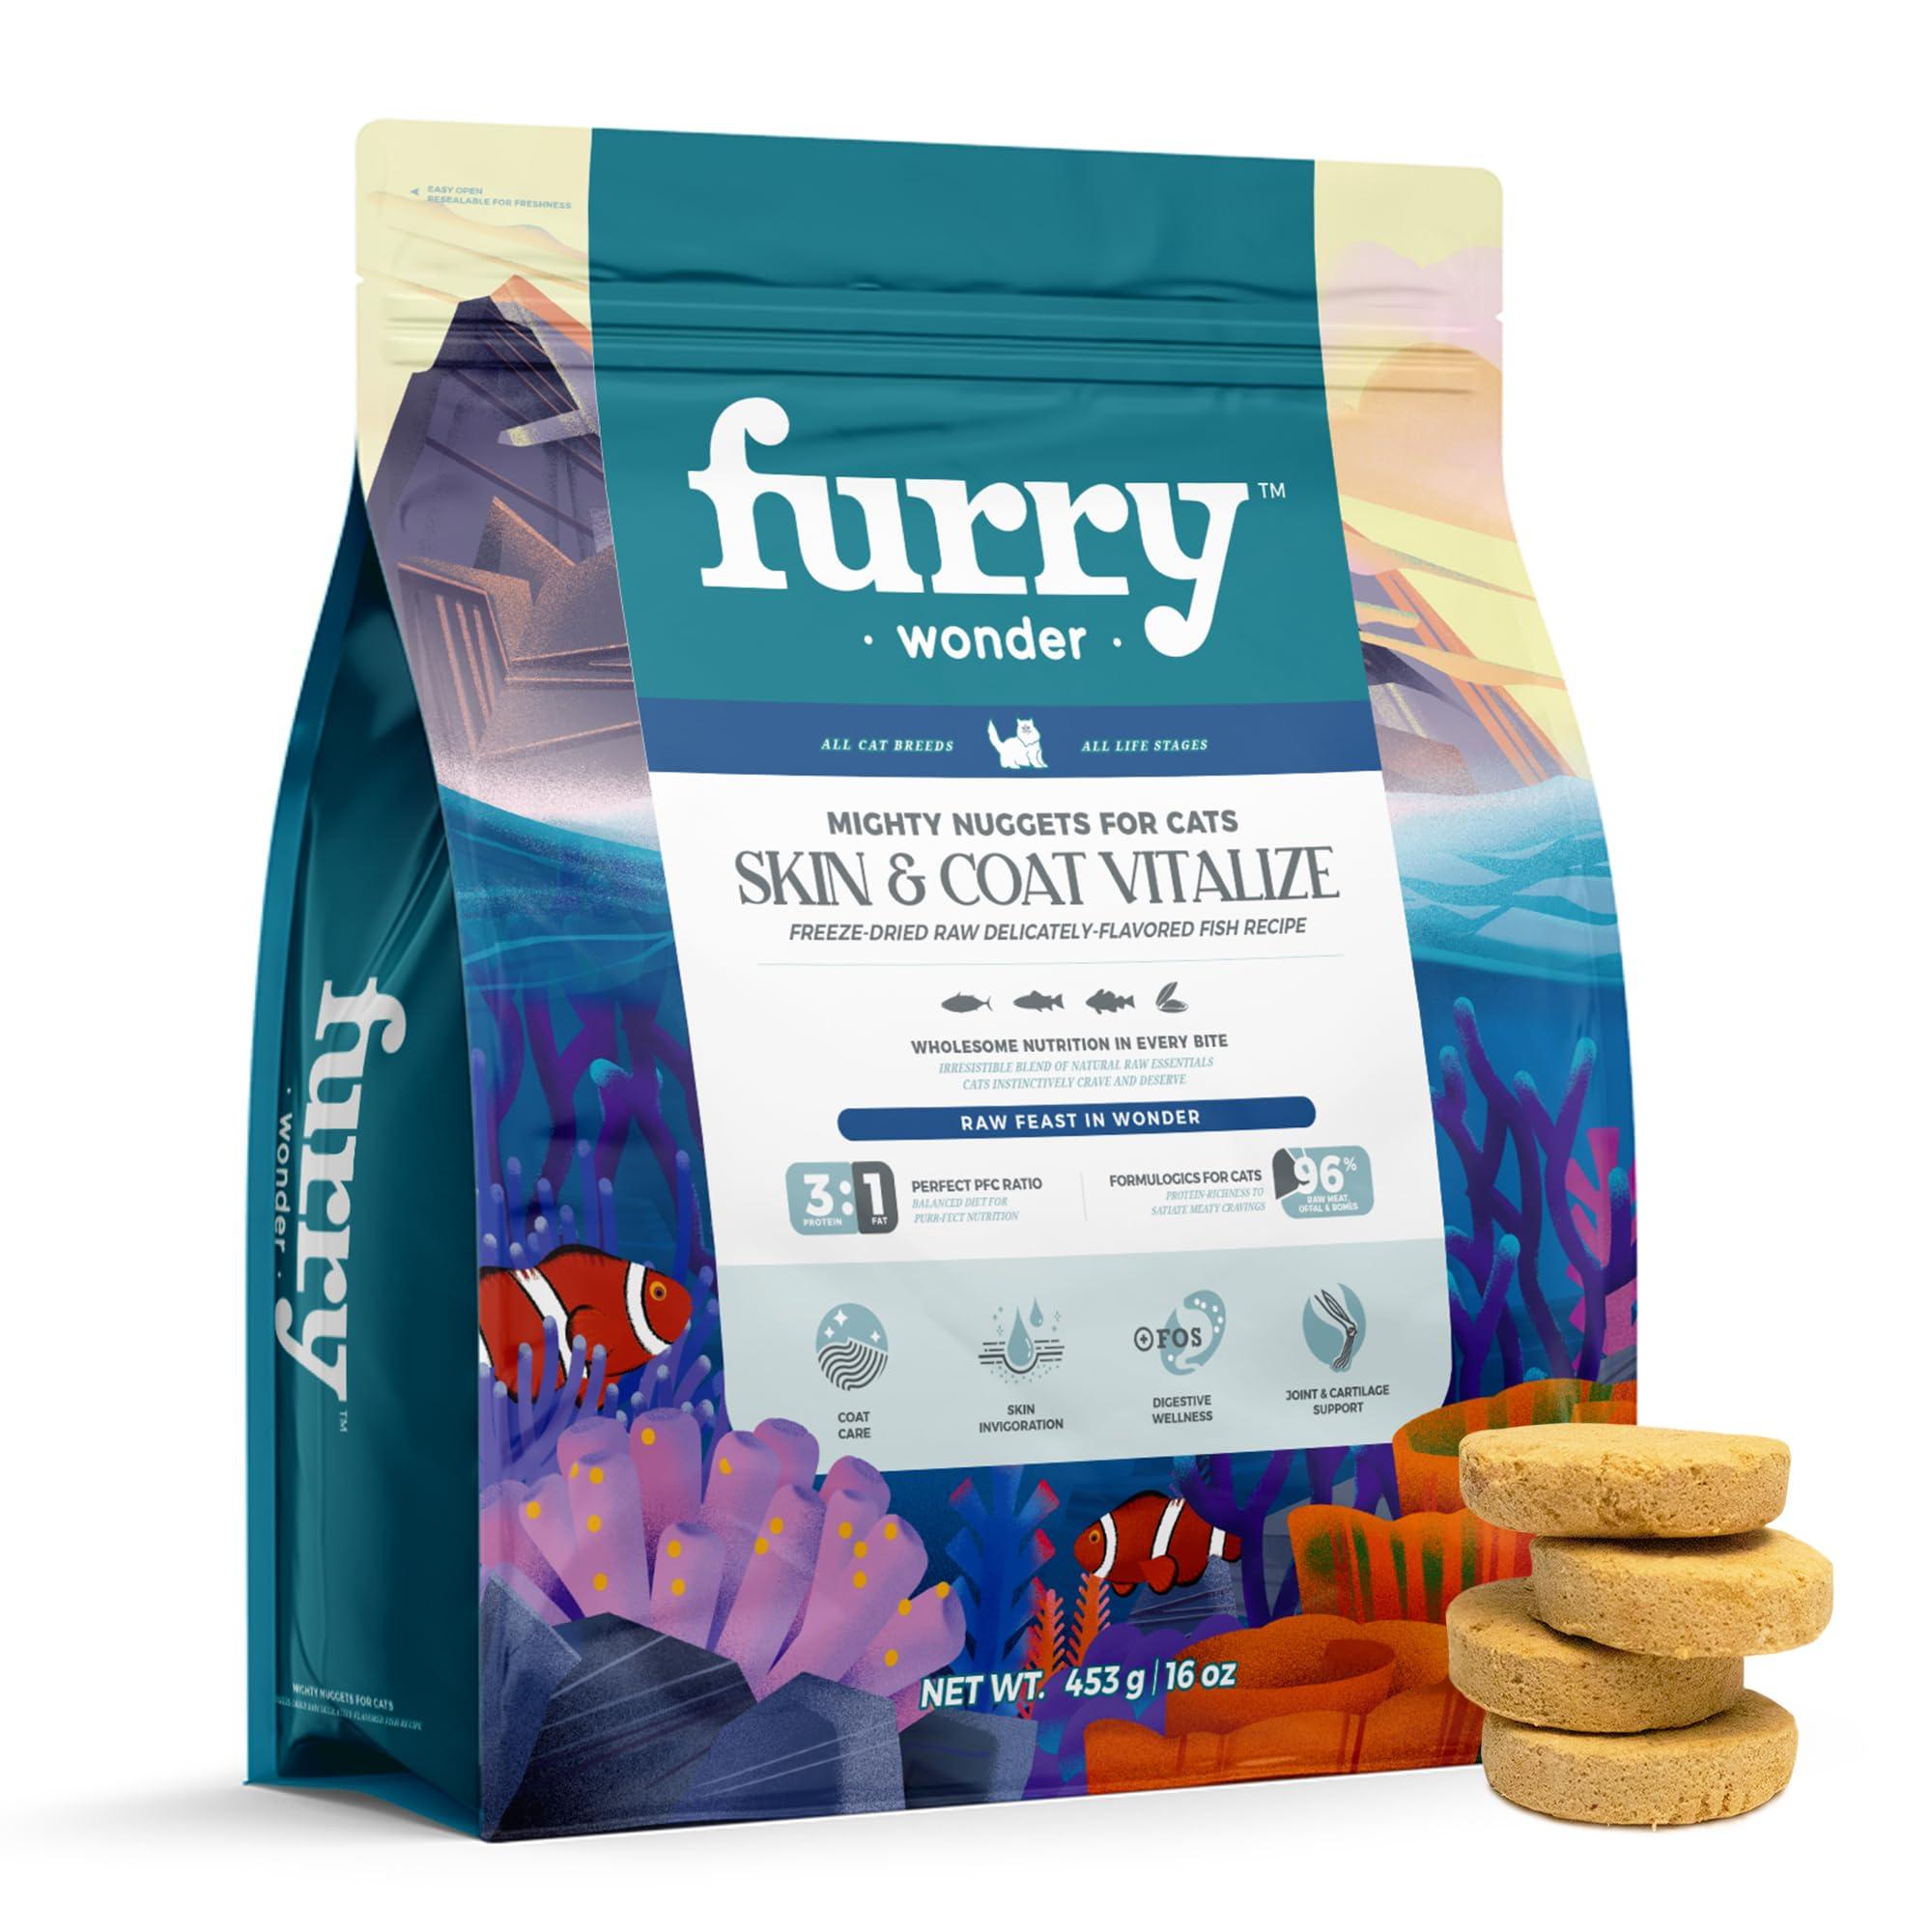 FURRY WONDER Freeze Dried Raw Cat Food Grain Free Mighty Nuggets for Cats 16oz High Protein Cat Food for All Breeds and Life Stages (16 Ounce (453g), Skin & Coat Vitalize)